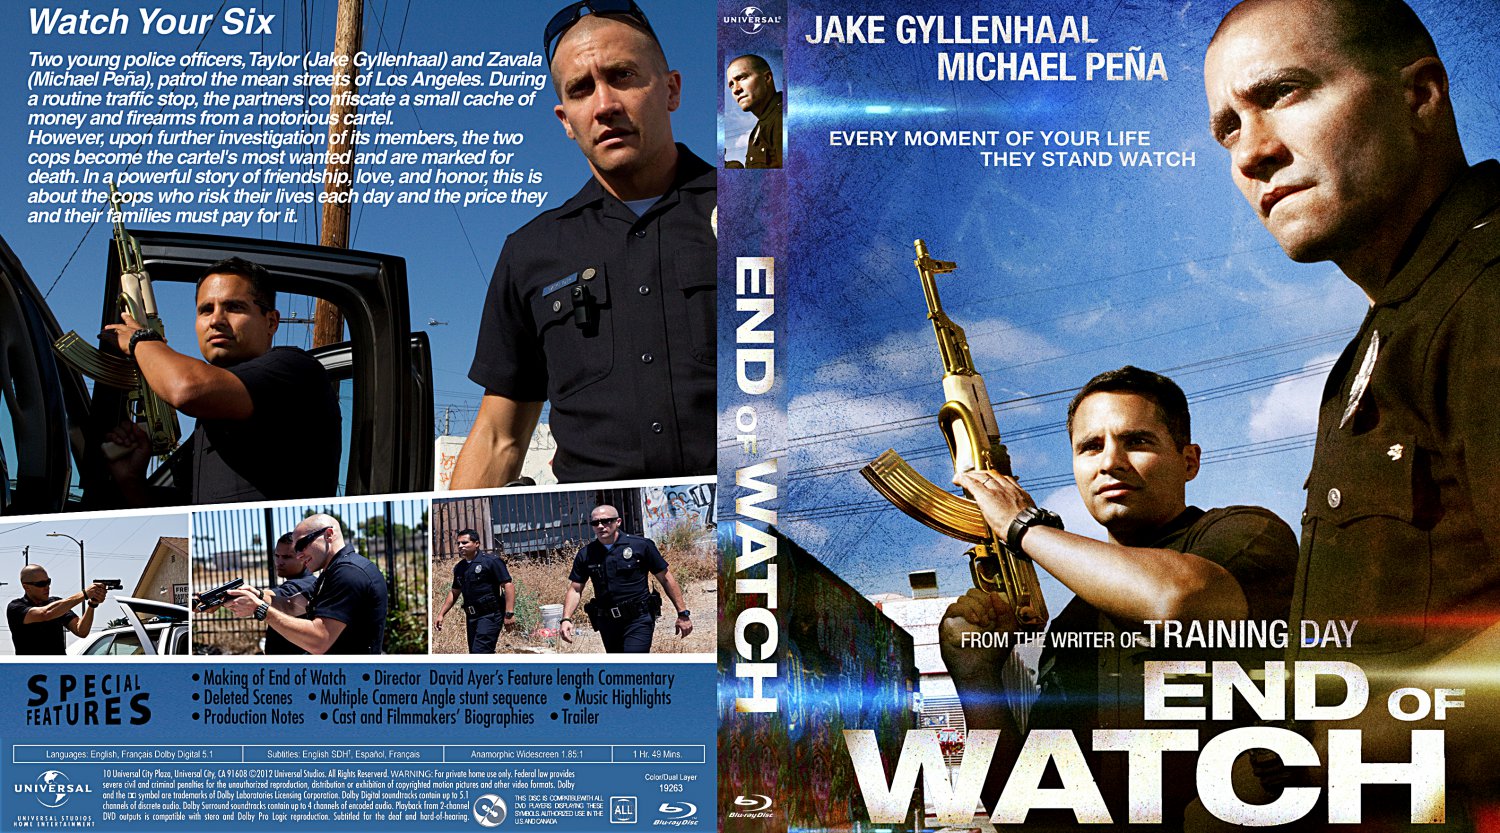 This programme watch. Бесстрашный 2006 DVD Covers. End of watch, 2012. End of watch (2012) Cover.